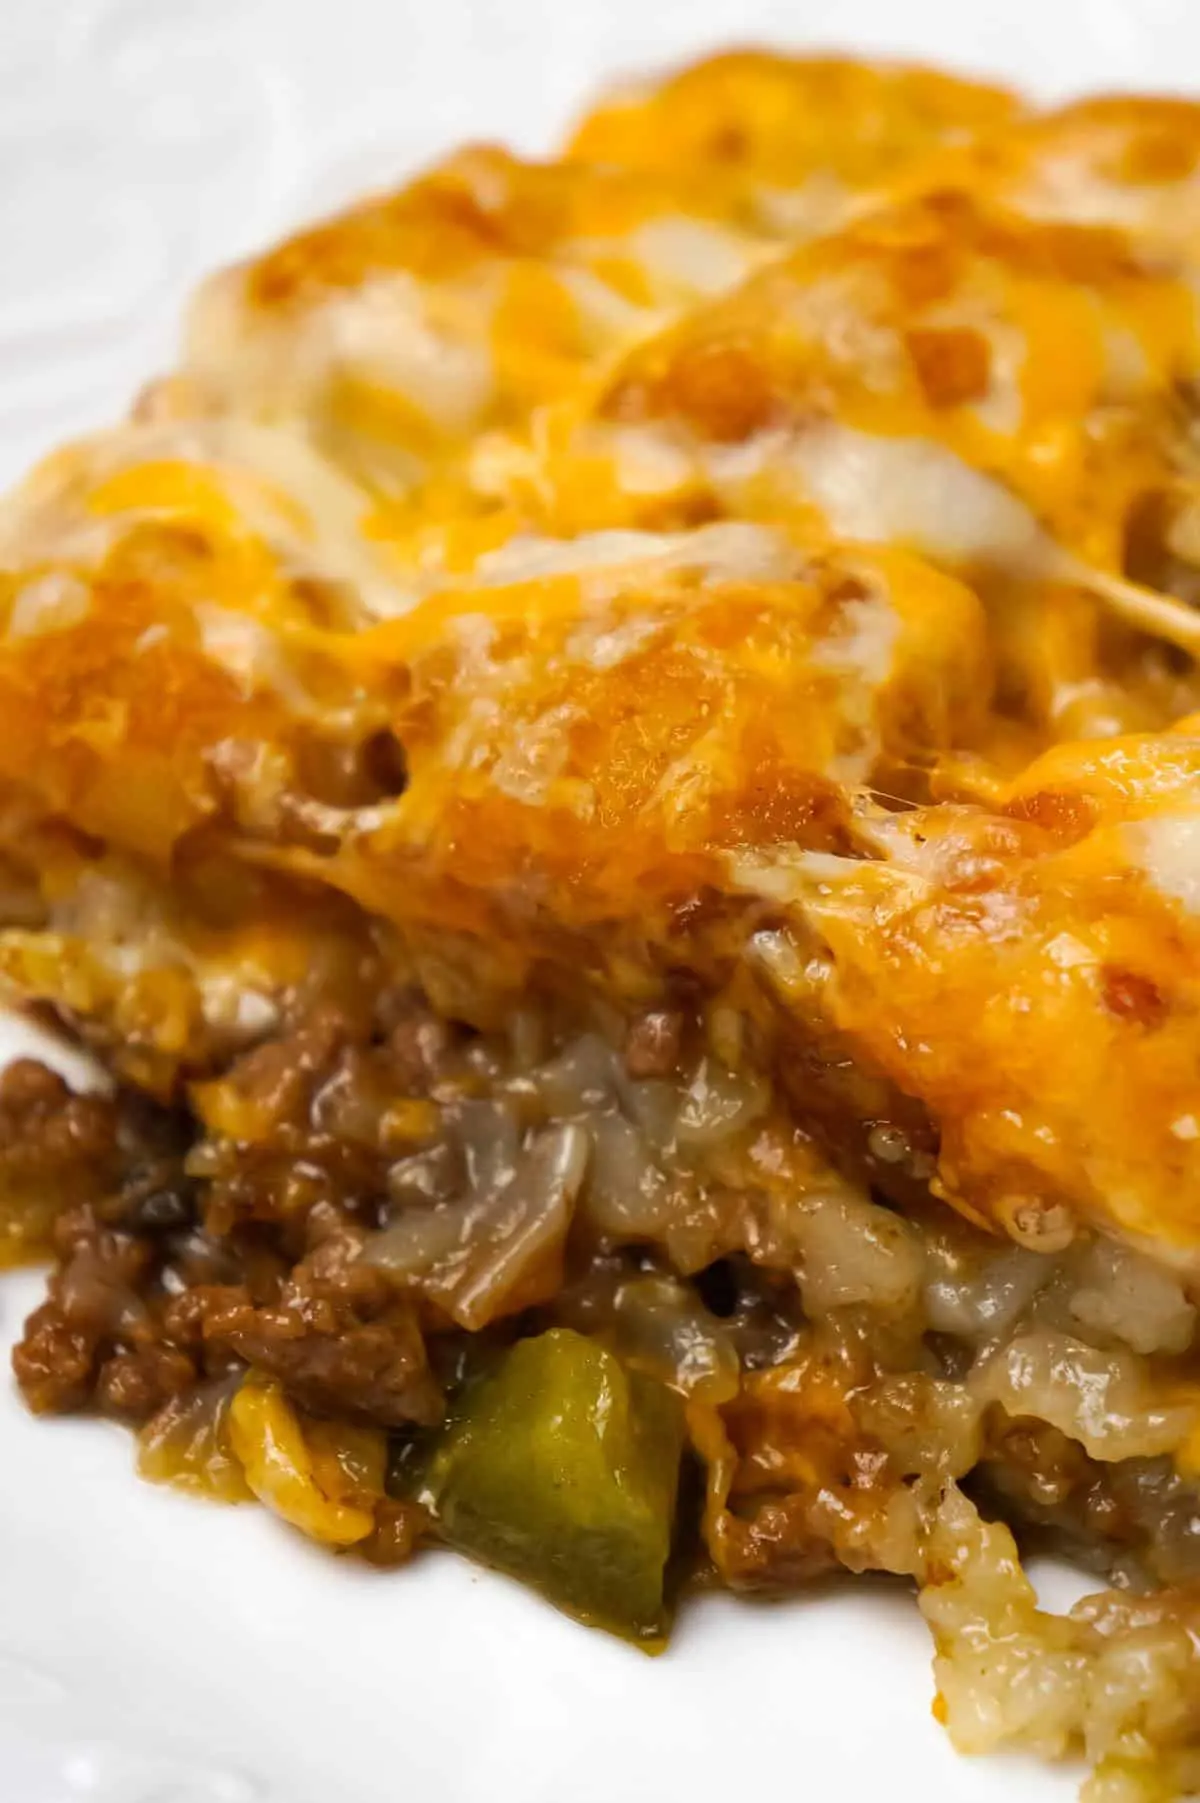 Philly Cheese Steak Tater Tot Casserole is a hearty dinner recipe with a base of ground beef, diced onion, diced green peppers and sliced mushrooms tossed in brown gravy and topped with shredded cheese and tater tots.